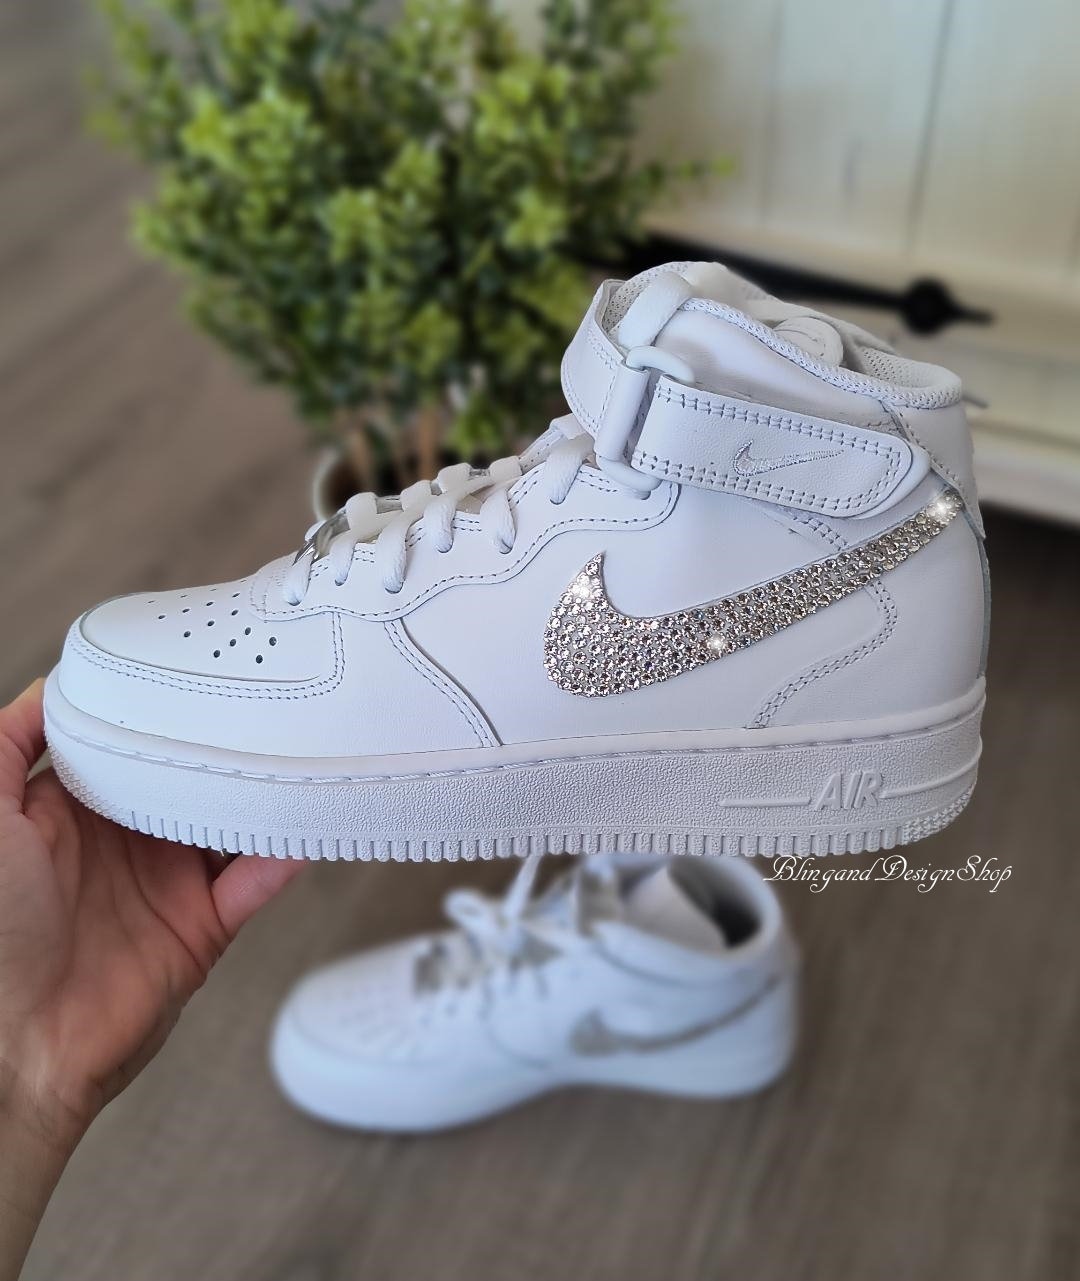 Women's Bling All White Air Force 1 High Top Sneakers -  Sweden